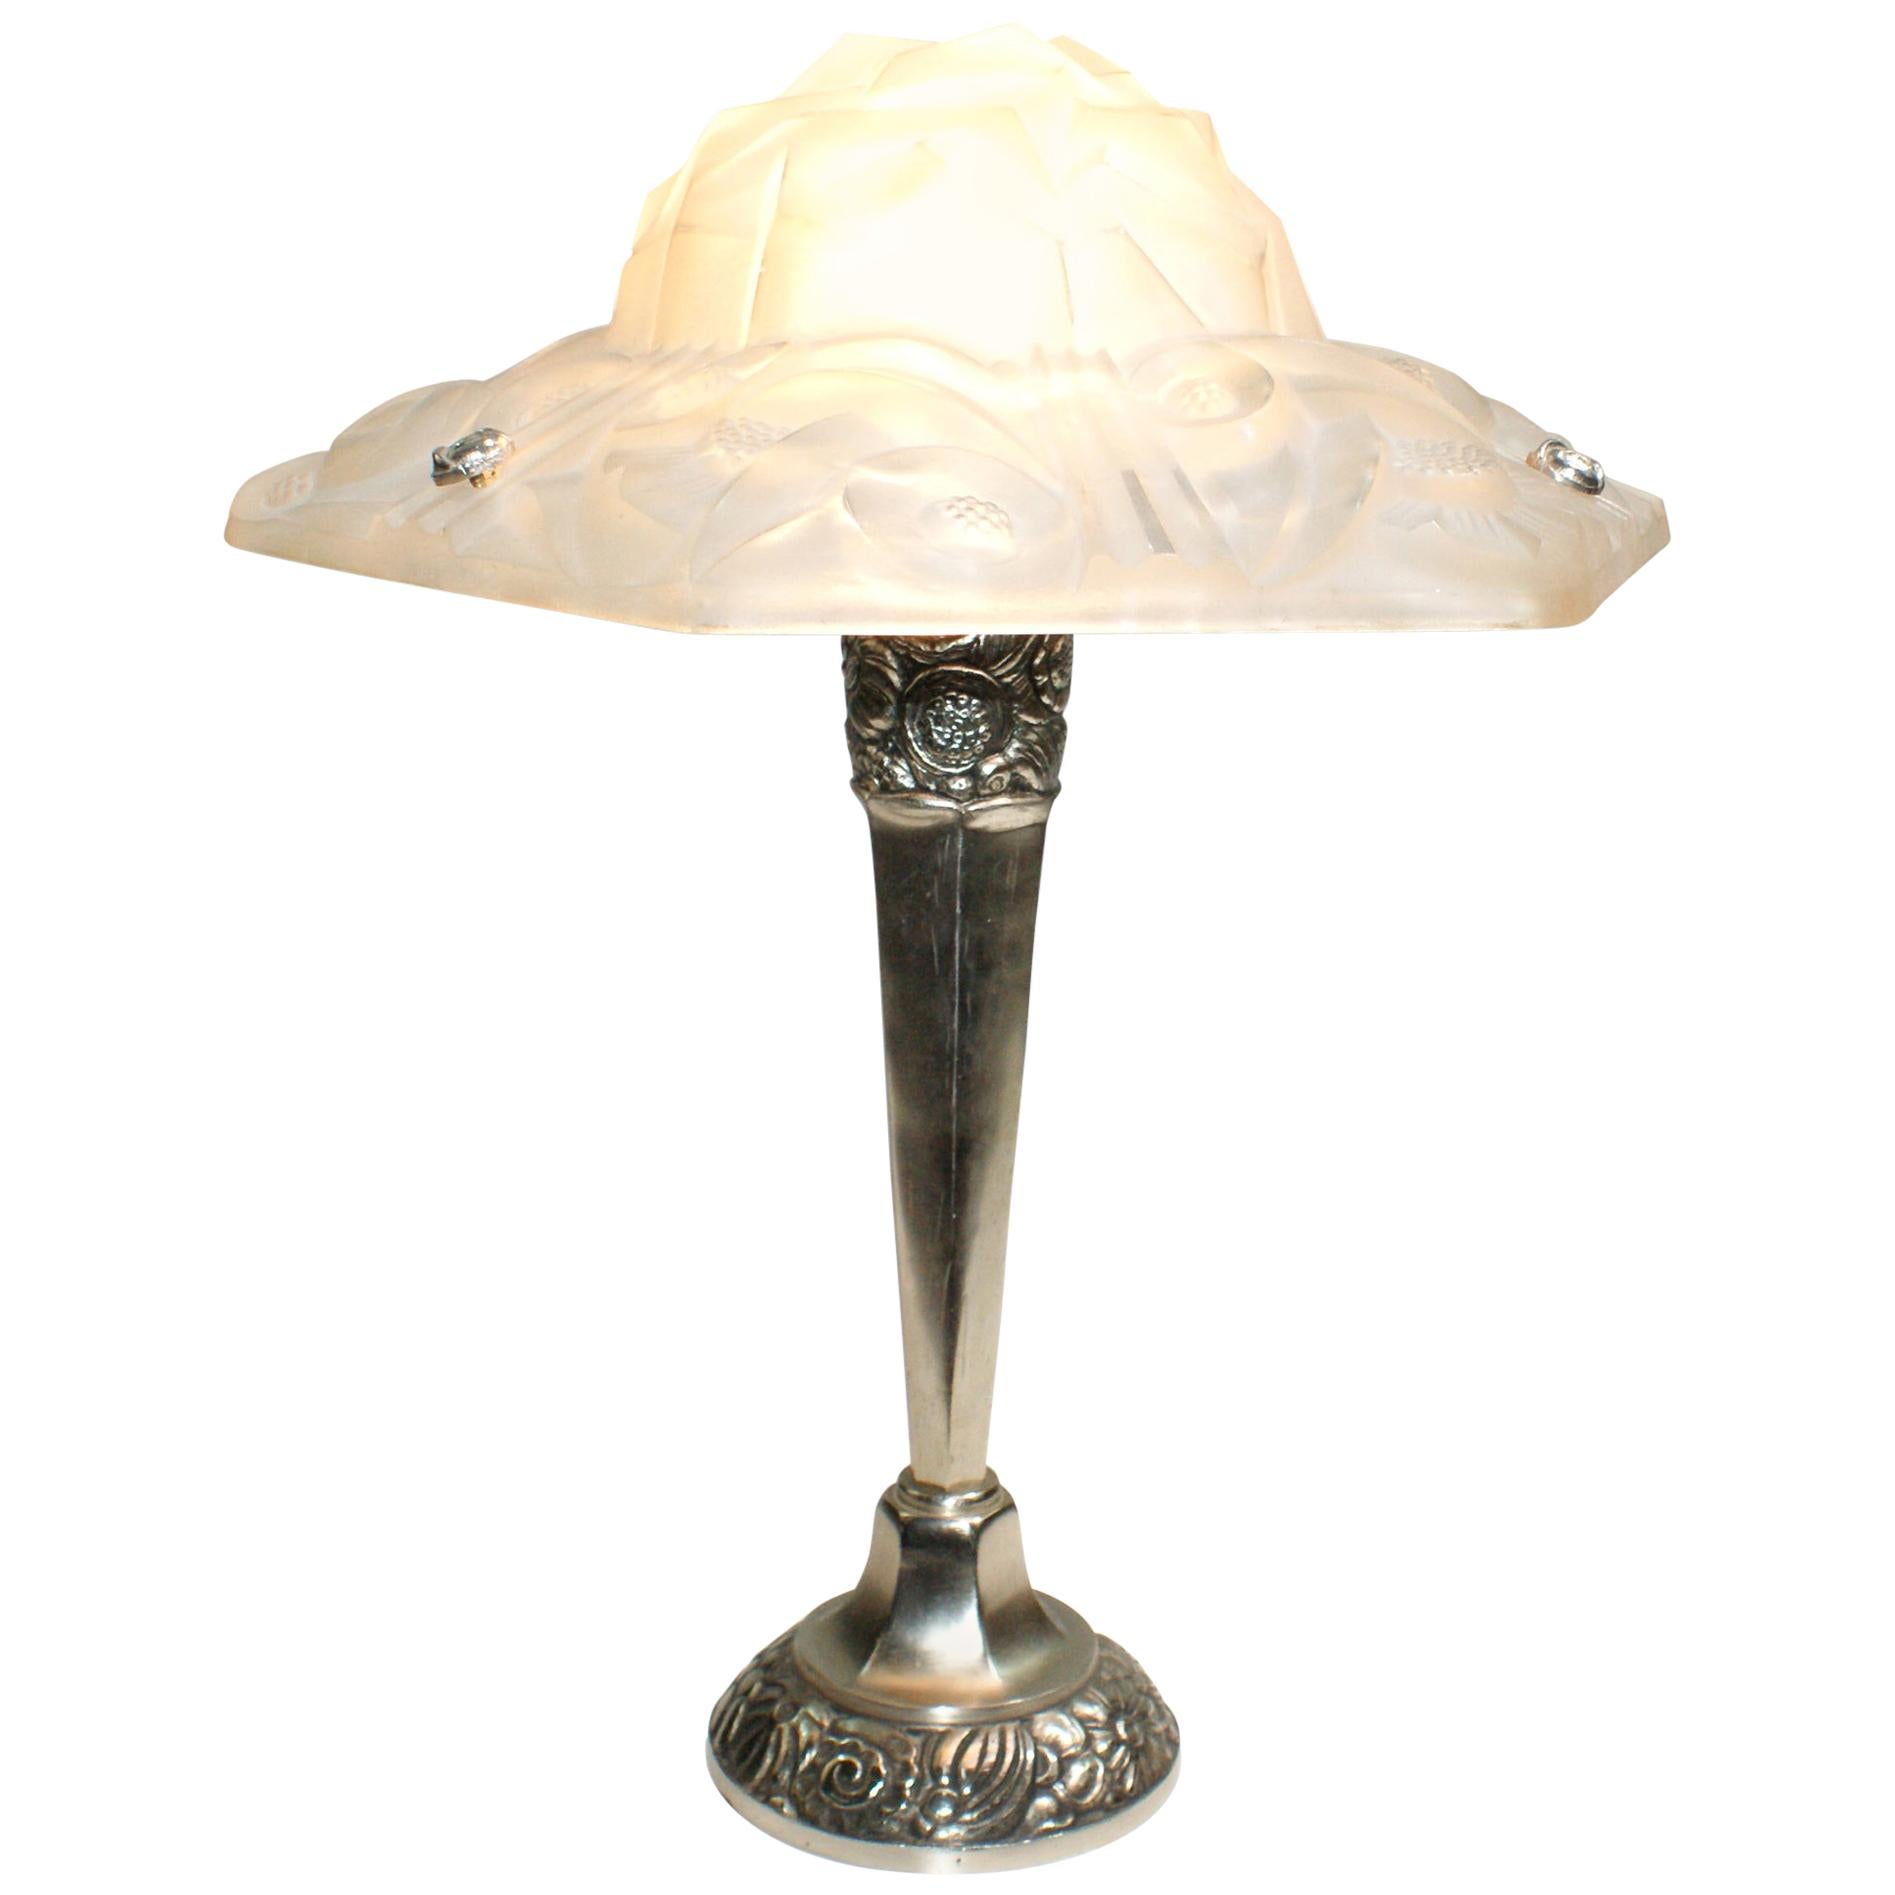 French Art Deco Floral Table Lamp Signed “Degue”